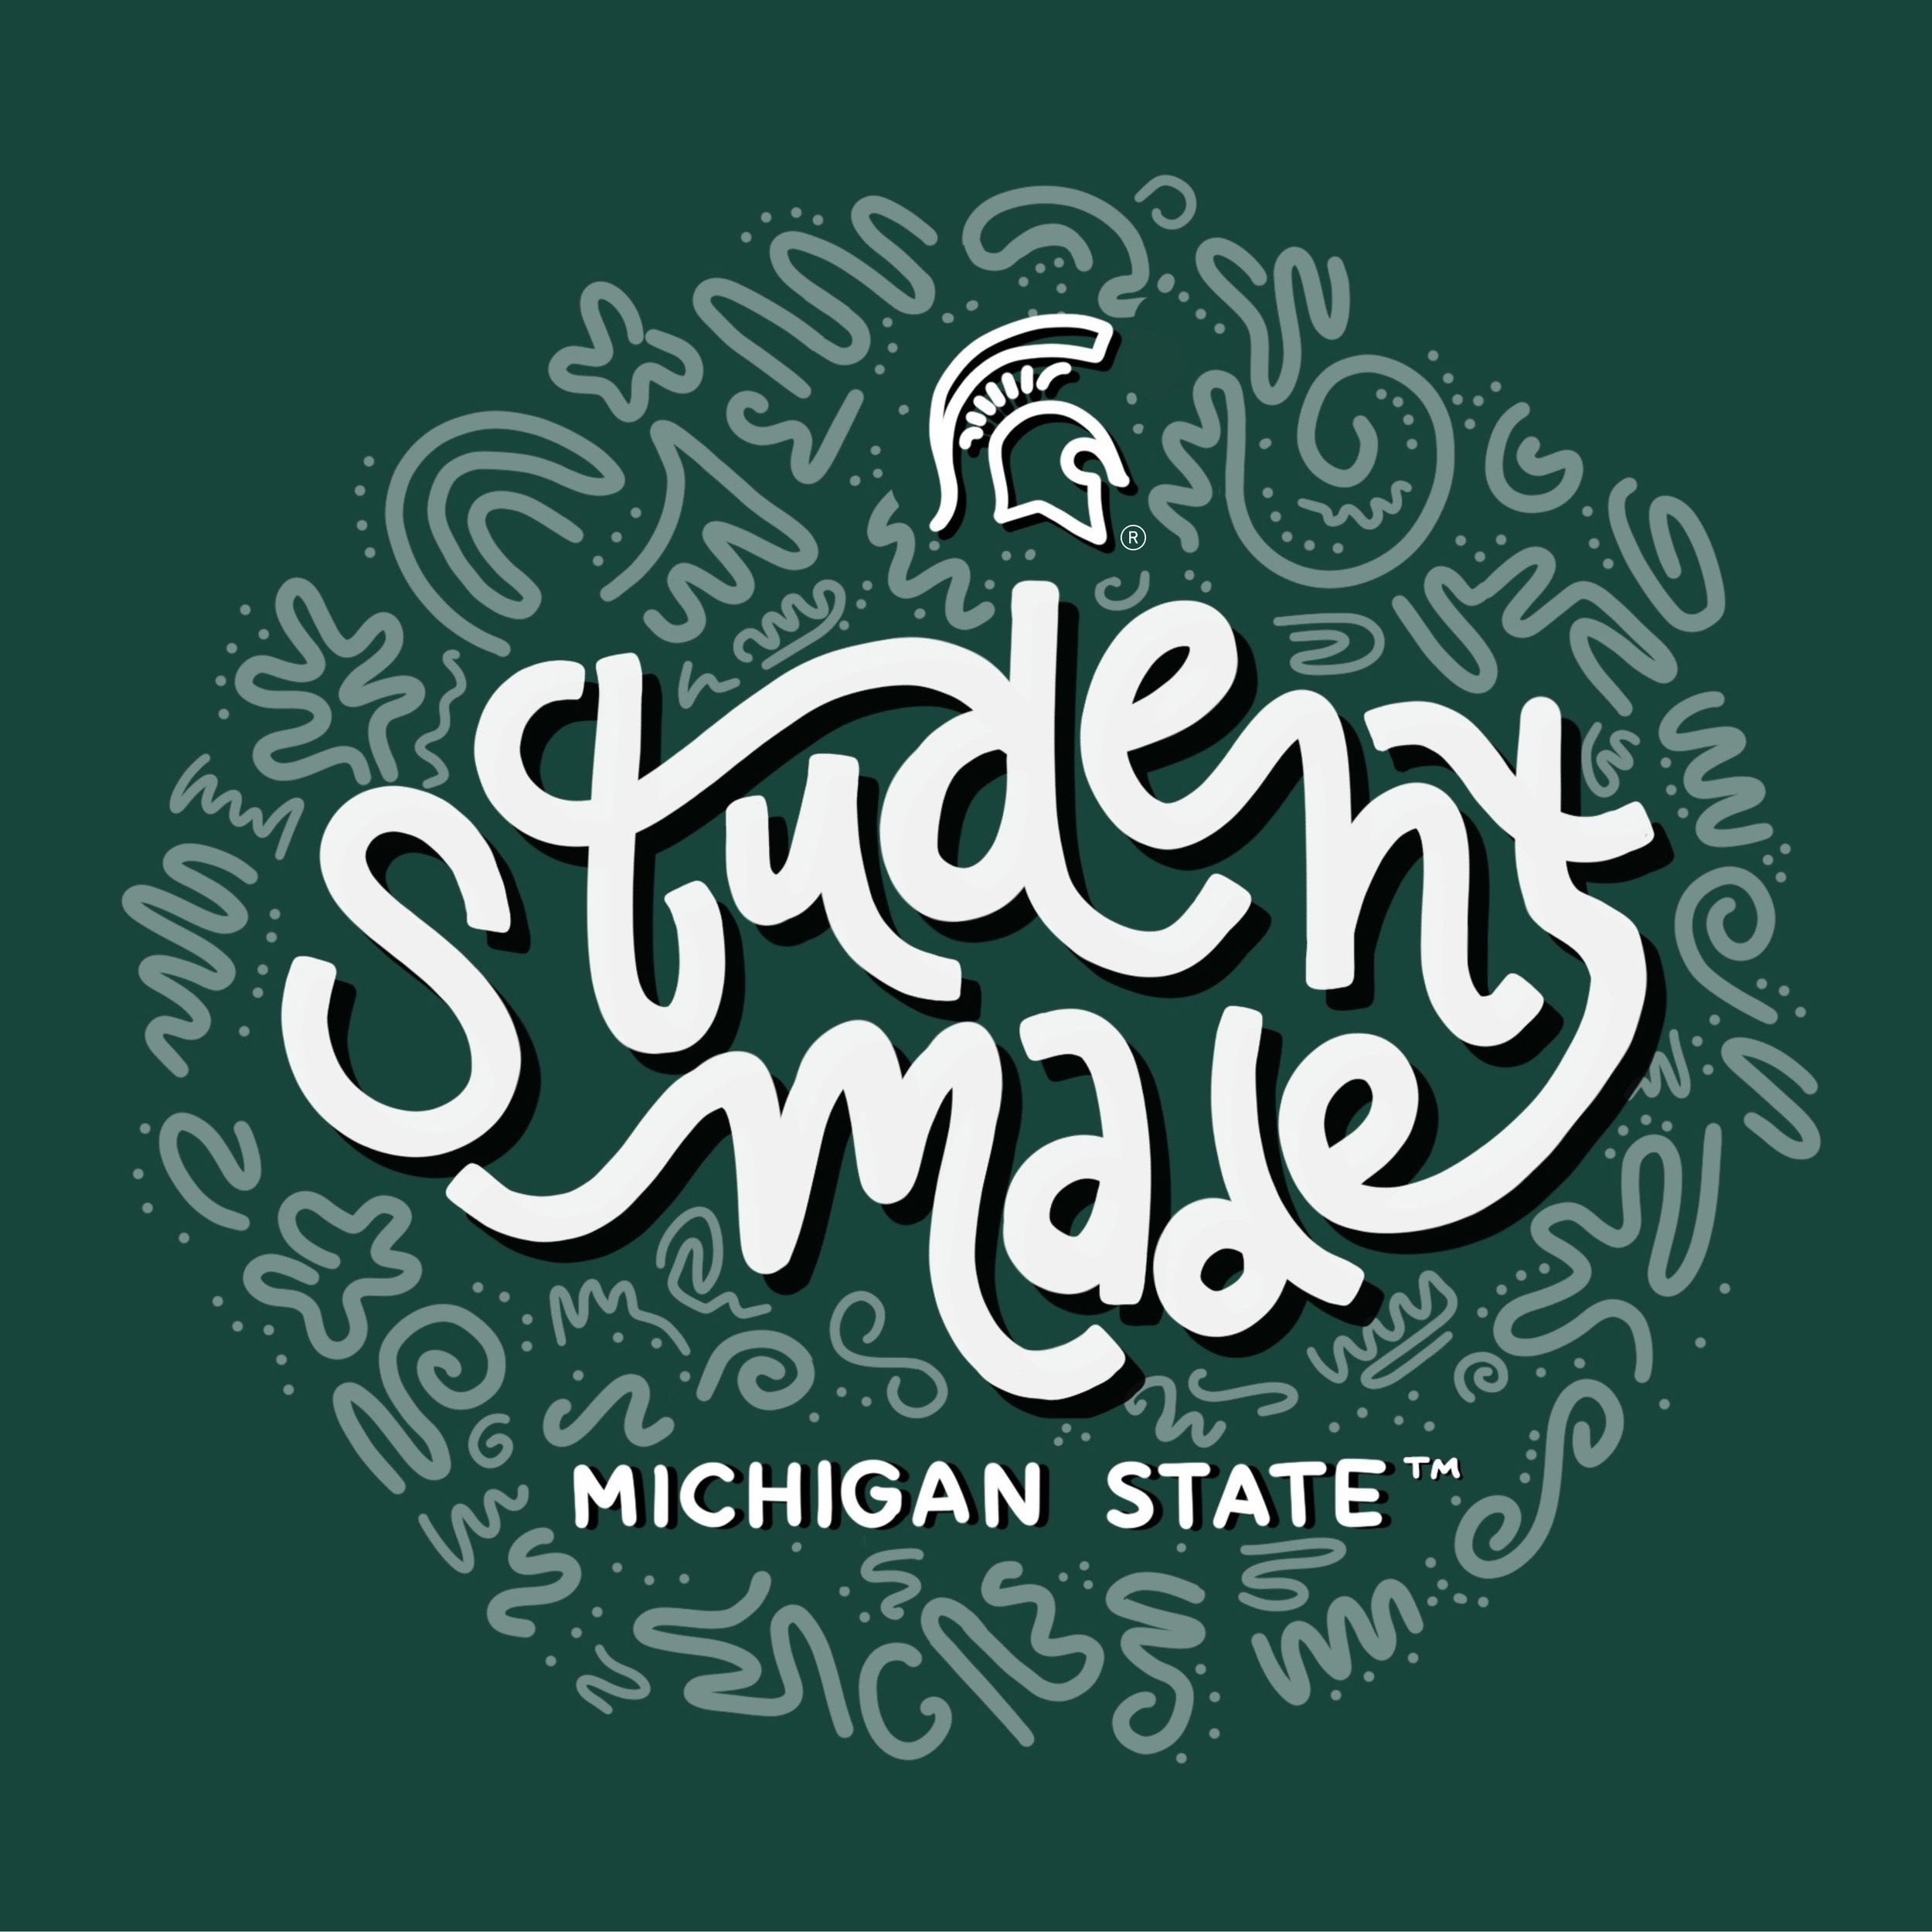 A logo of a green background with white doodles of a Spartan helmet and the text: Student Made, Michigan State